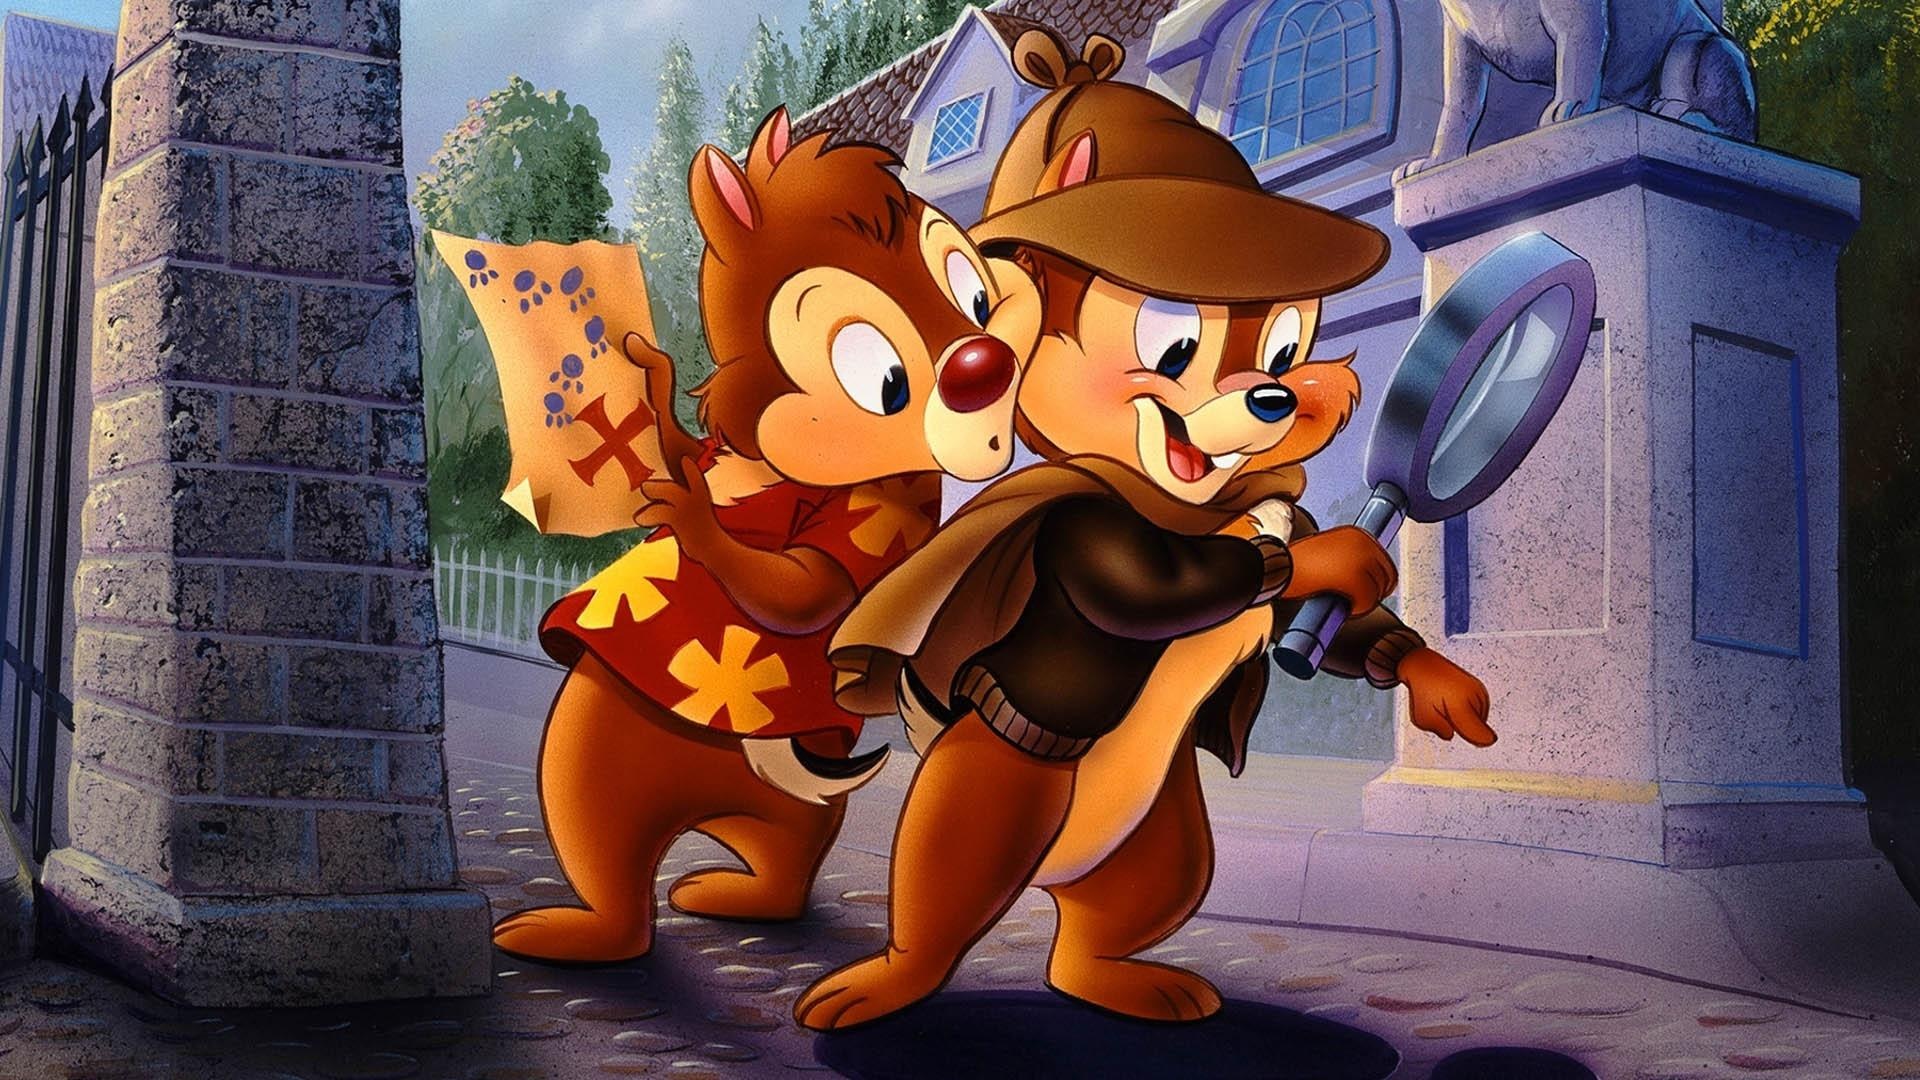 HD wallpaper, Adventure And Mischief, Playful Characters, Desktop Full Hd Chip N Dale Rescue Rangers 2022 Background Photo, 1920X1080 Full Hd Desktop, Animated Series